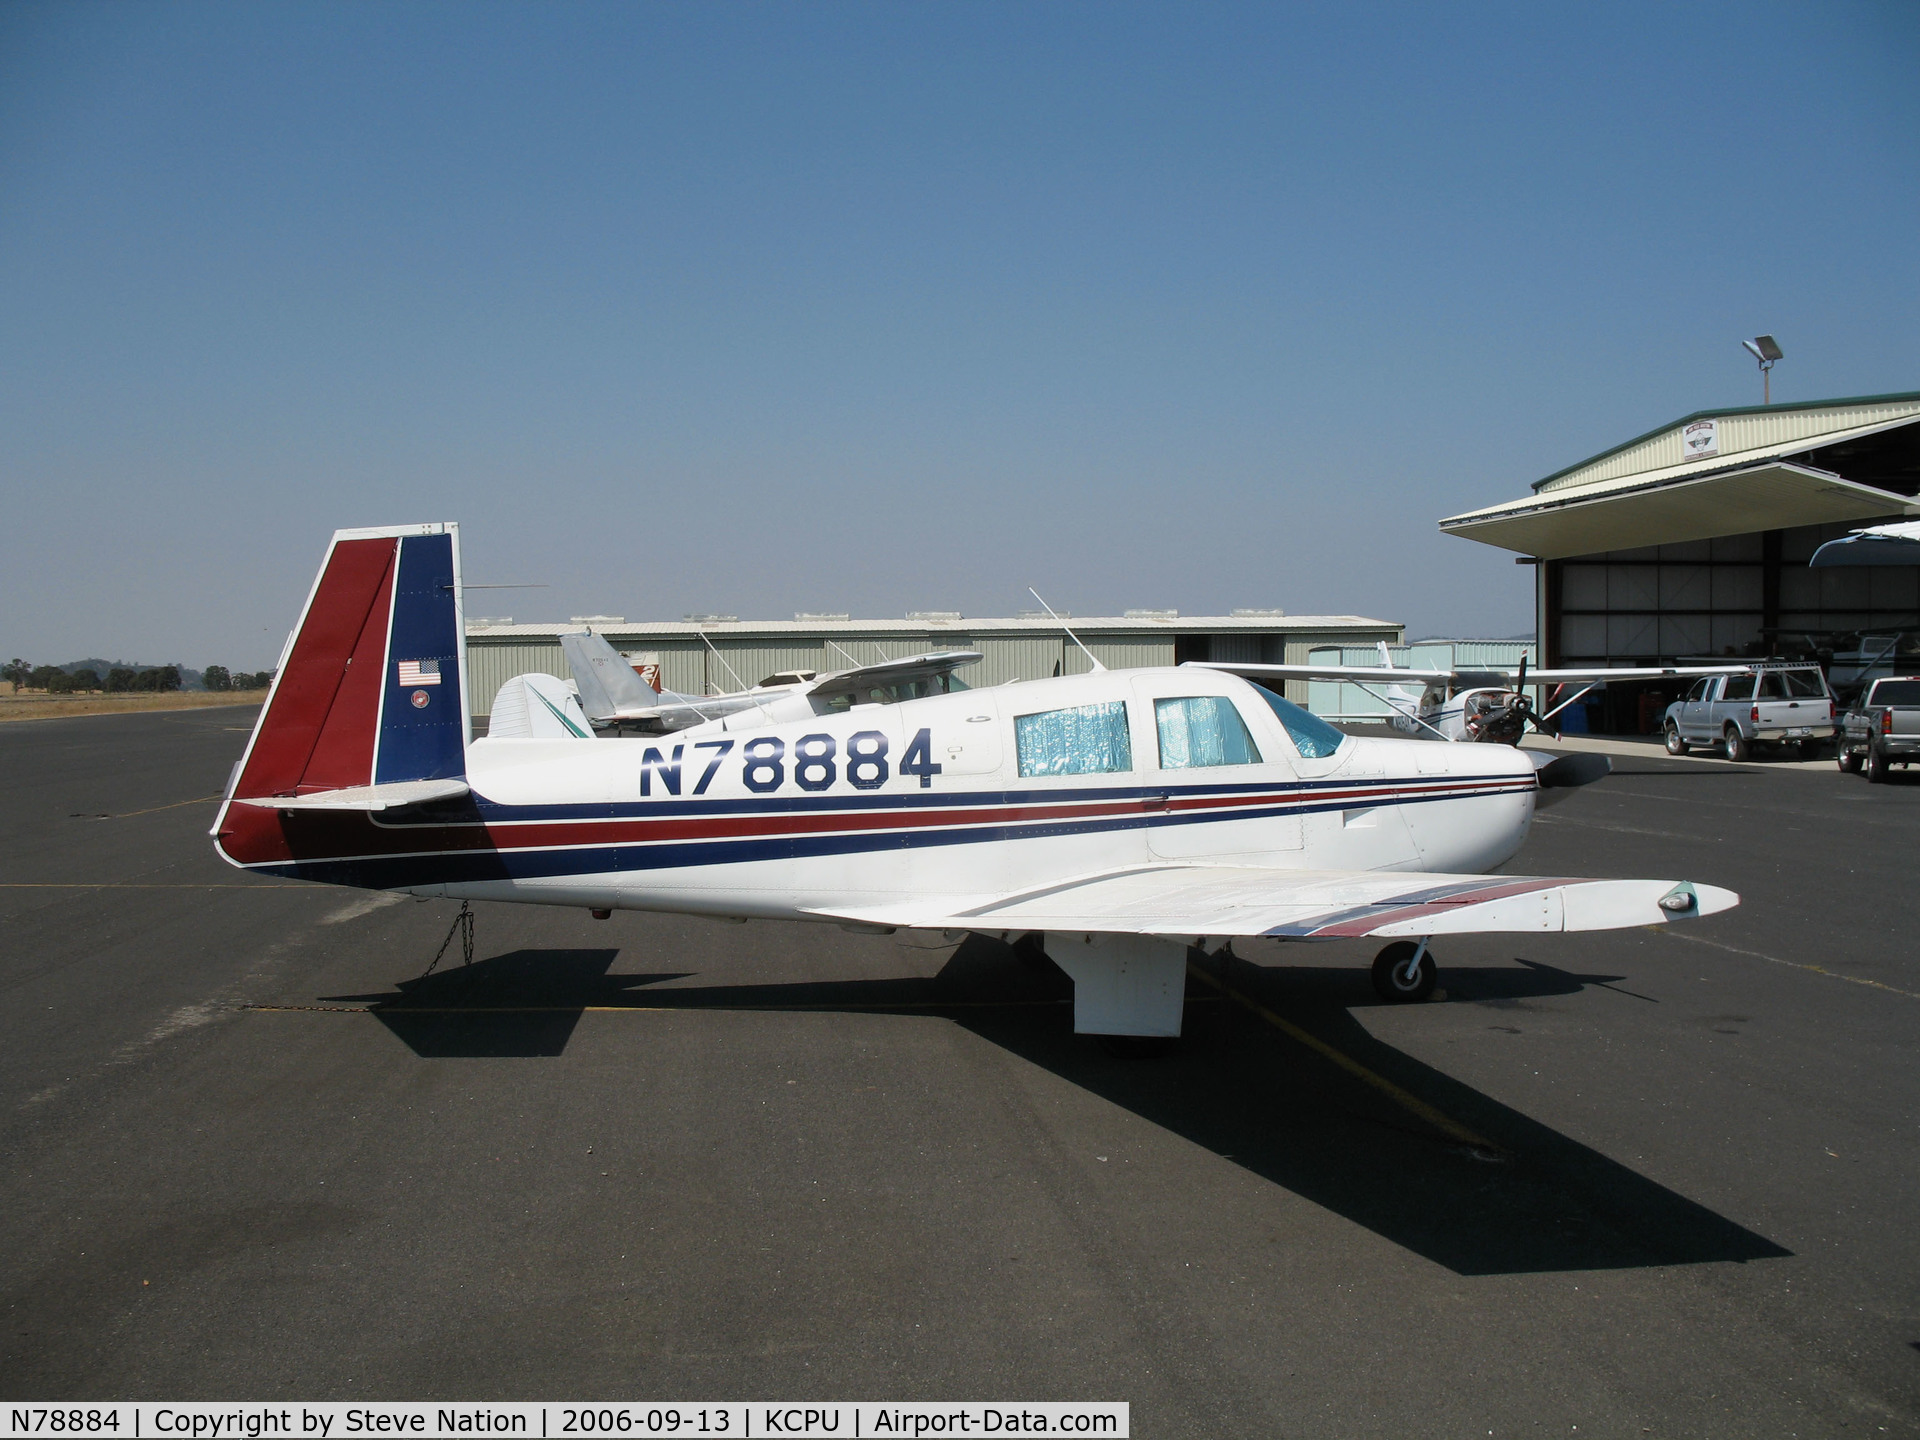 N78884, 1964 Mooney M20C Ranger C/N 2899, Locally-based 1964 Mooney M20E @ Maury Rasmussen Field/Calaveras County Airport, San Andreas, CA (now registered to owner in Fort Worth, TX)